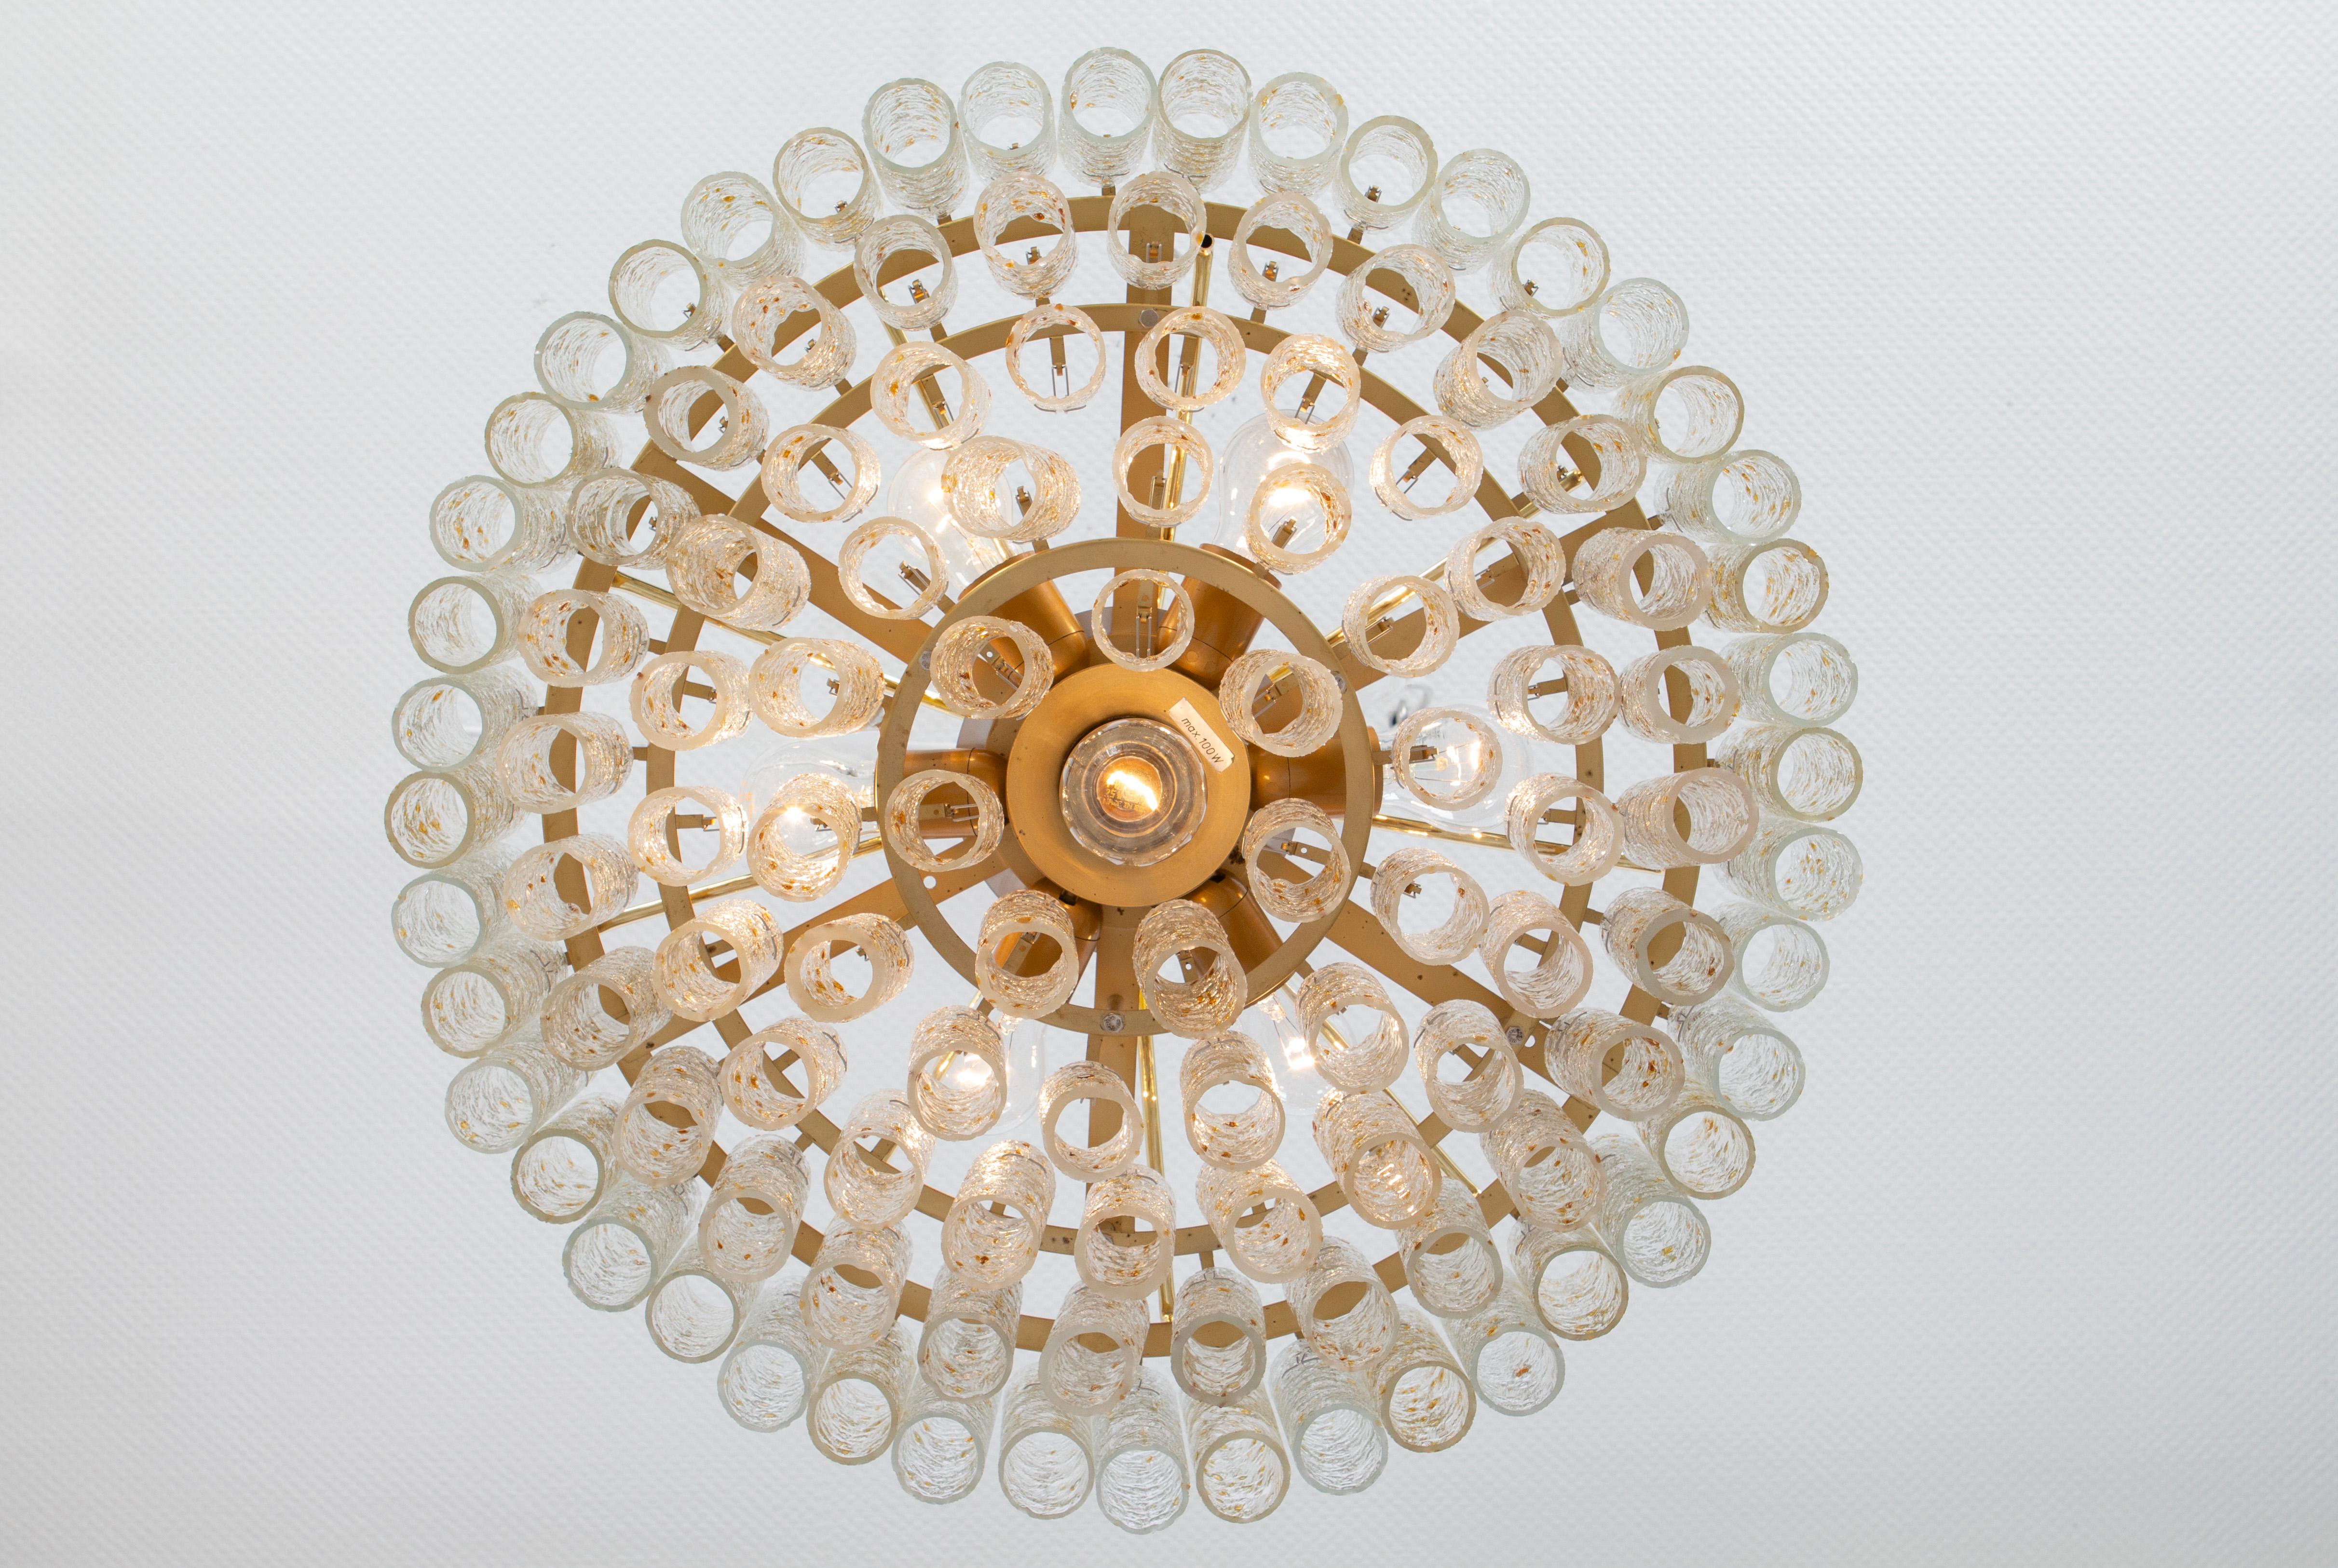 Stunning Large Doria Ice Glass Tubes Chandelier, Germany, 1960s For Sale 2